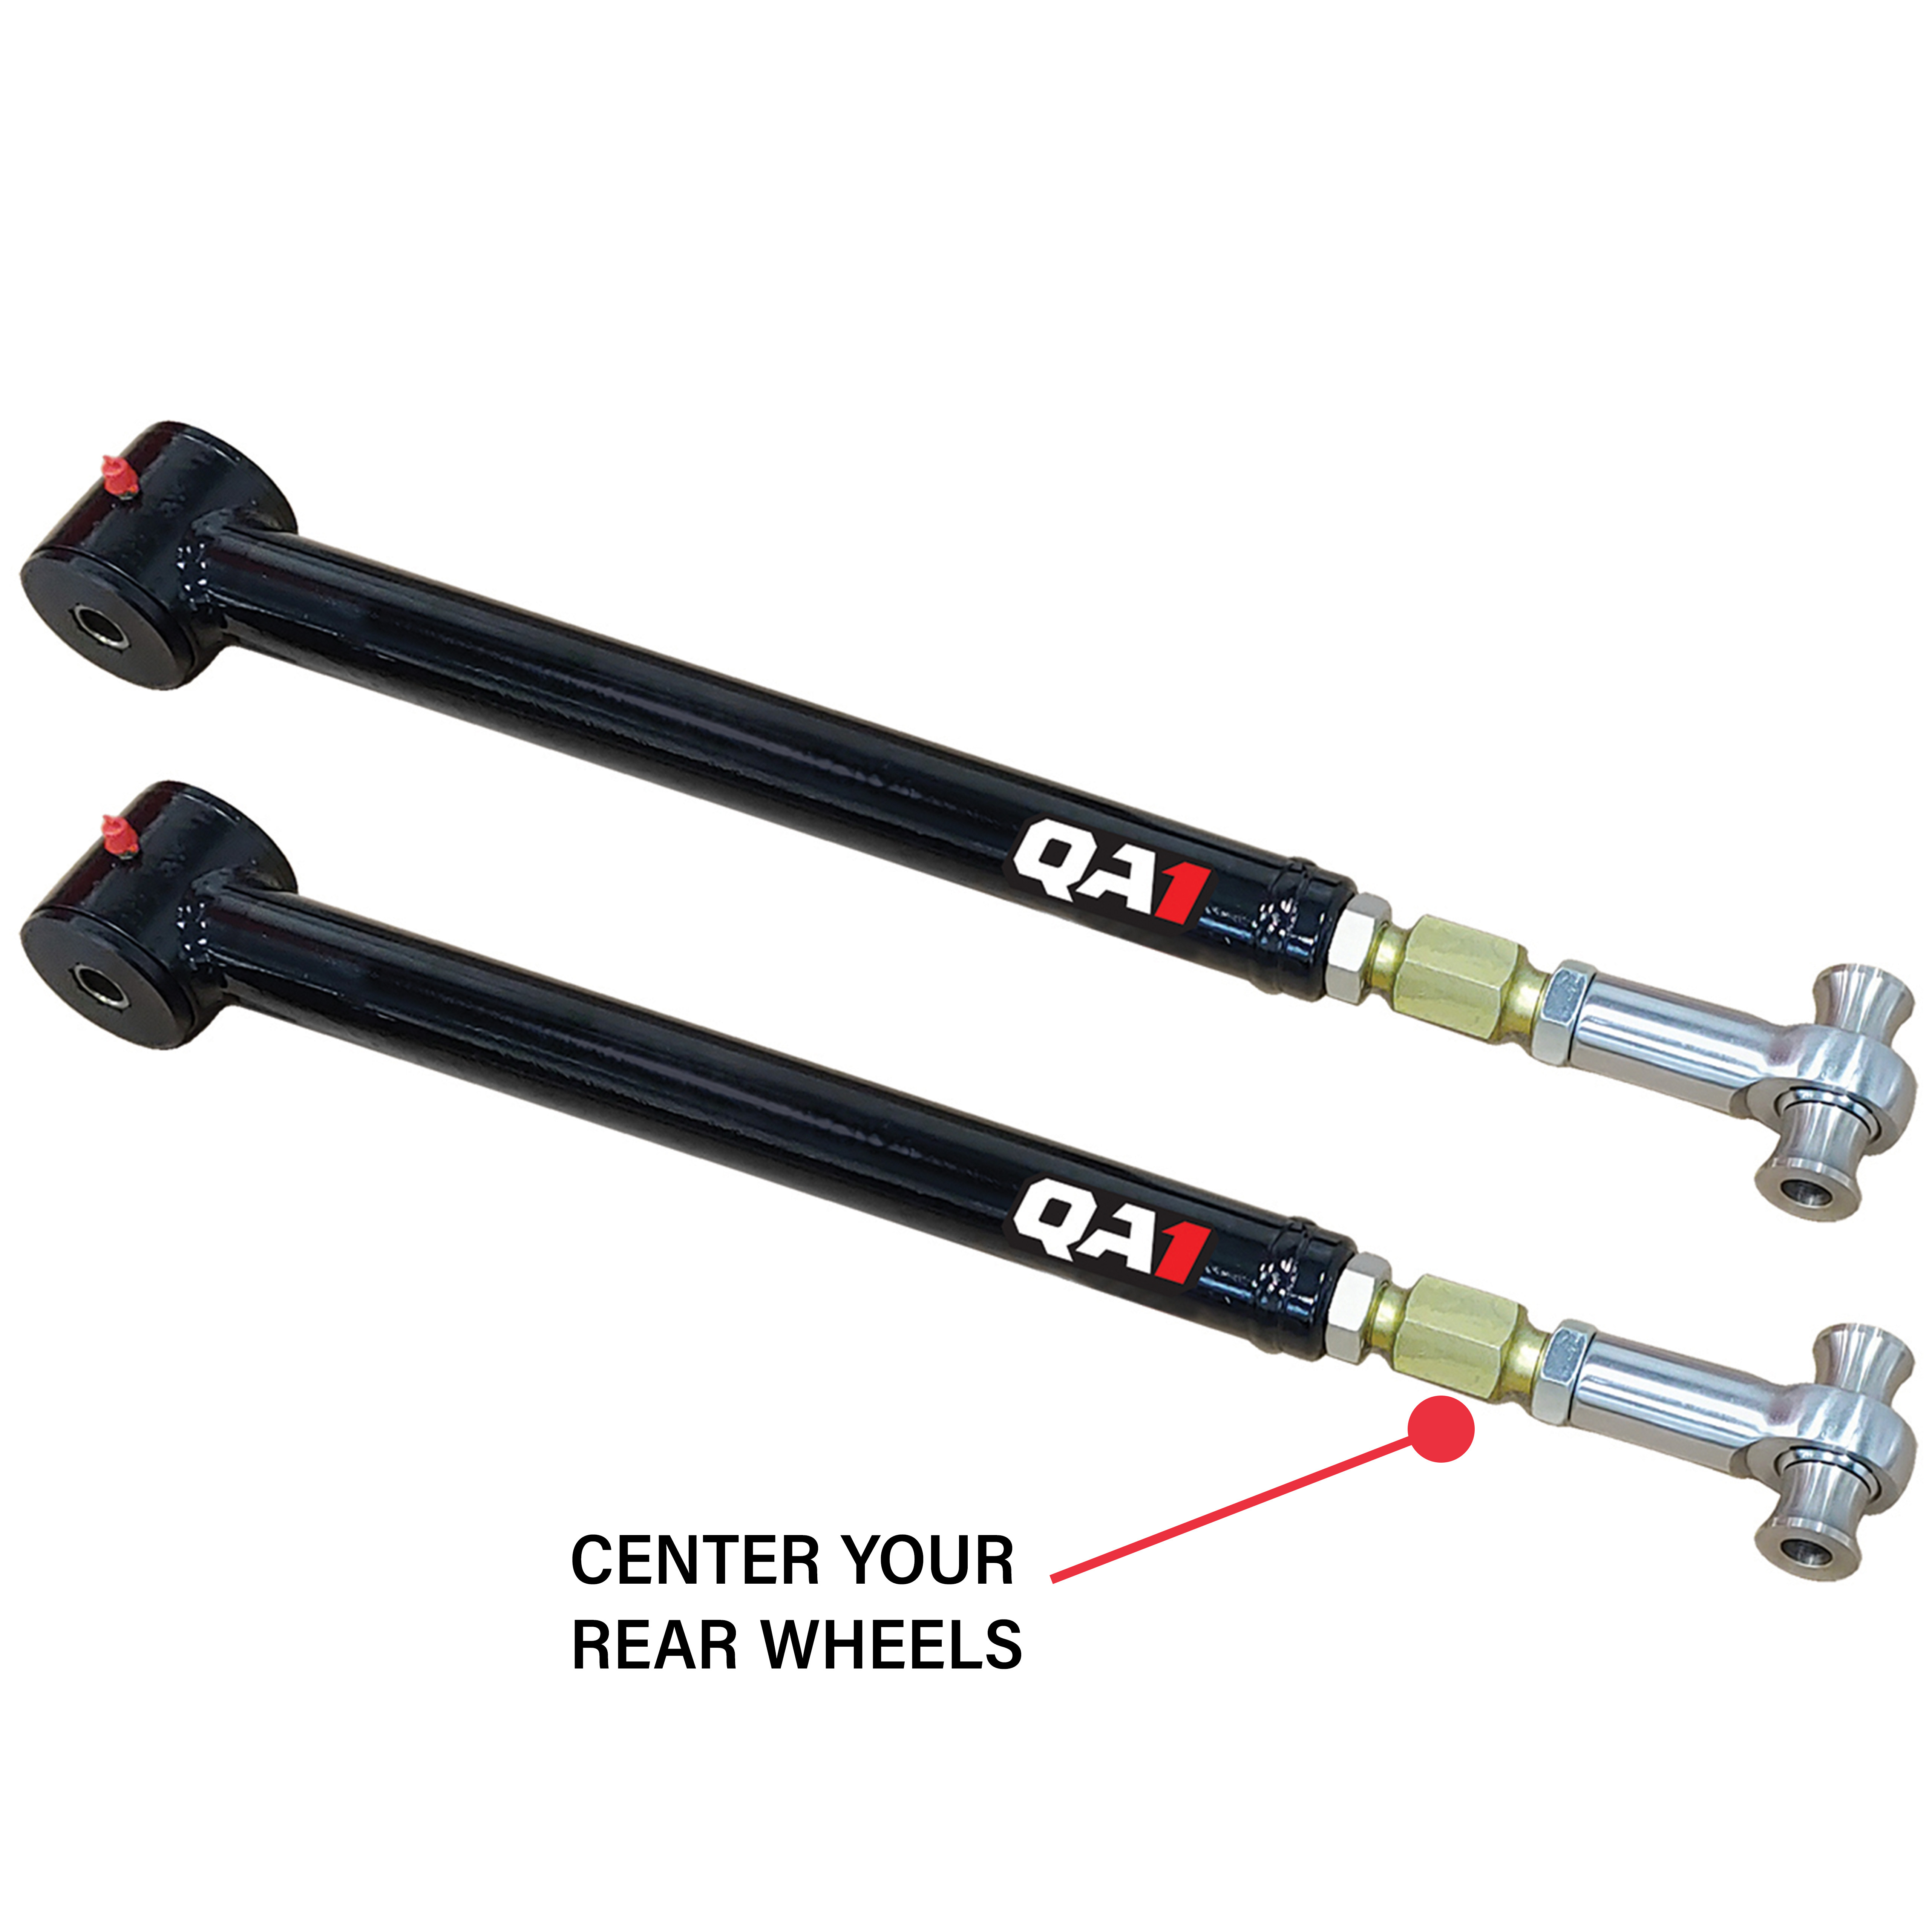 Center your rear wheels with adjustable trailing arms.